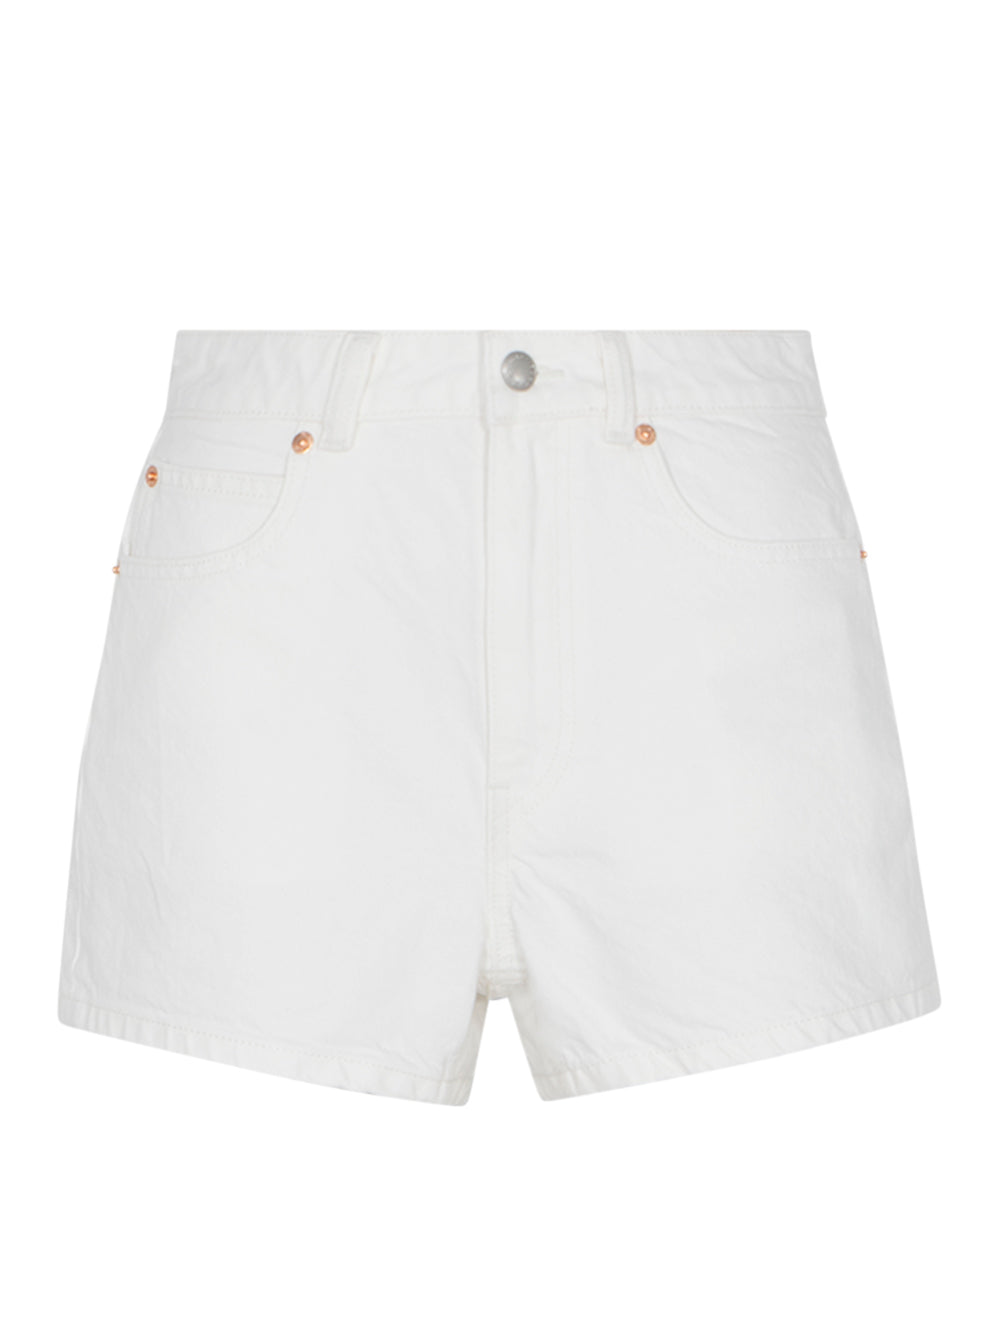 Shorty High Rise Shorts Logo Cut Out Embroidery (Vintage White)